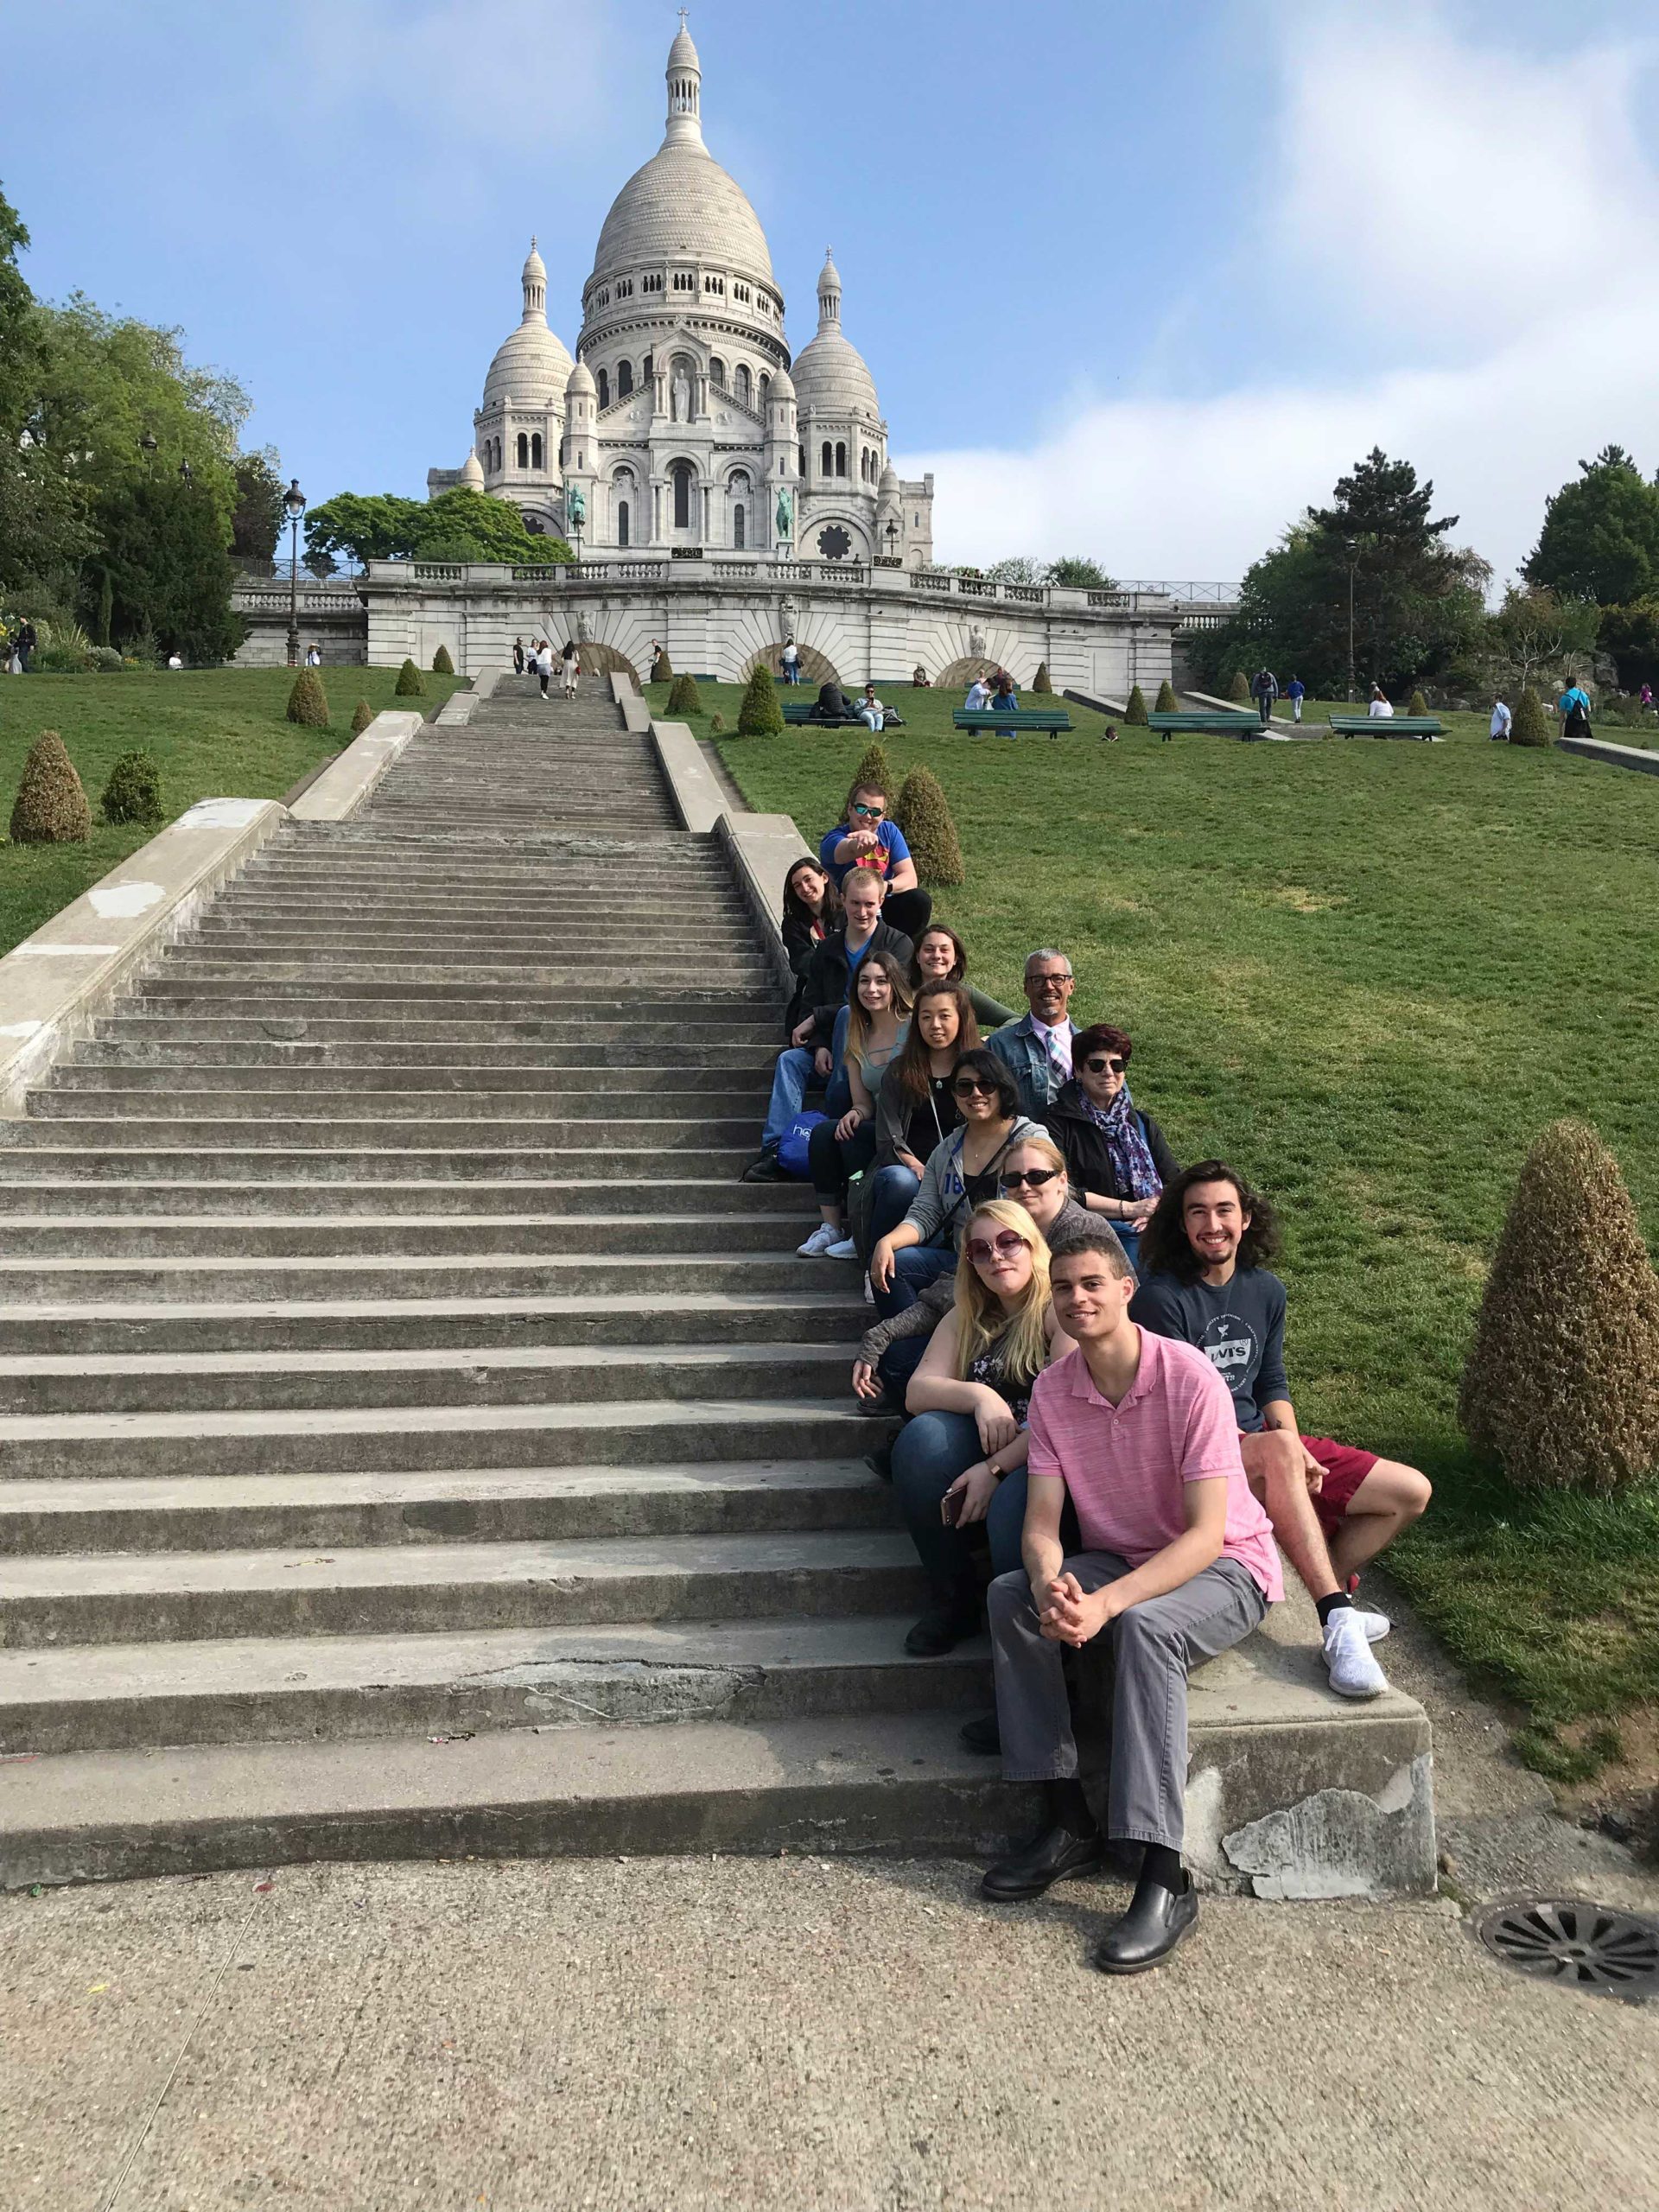 Students and professors sit on the bottom of the wide concrete rail on the right of the steps. The Sacre Coeur Basilica is at the top of the steps, and there is a lot of greenery in the park.